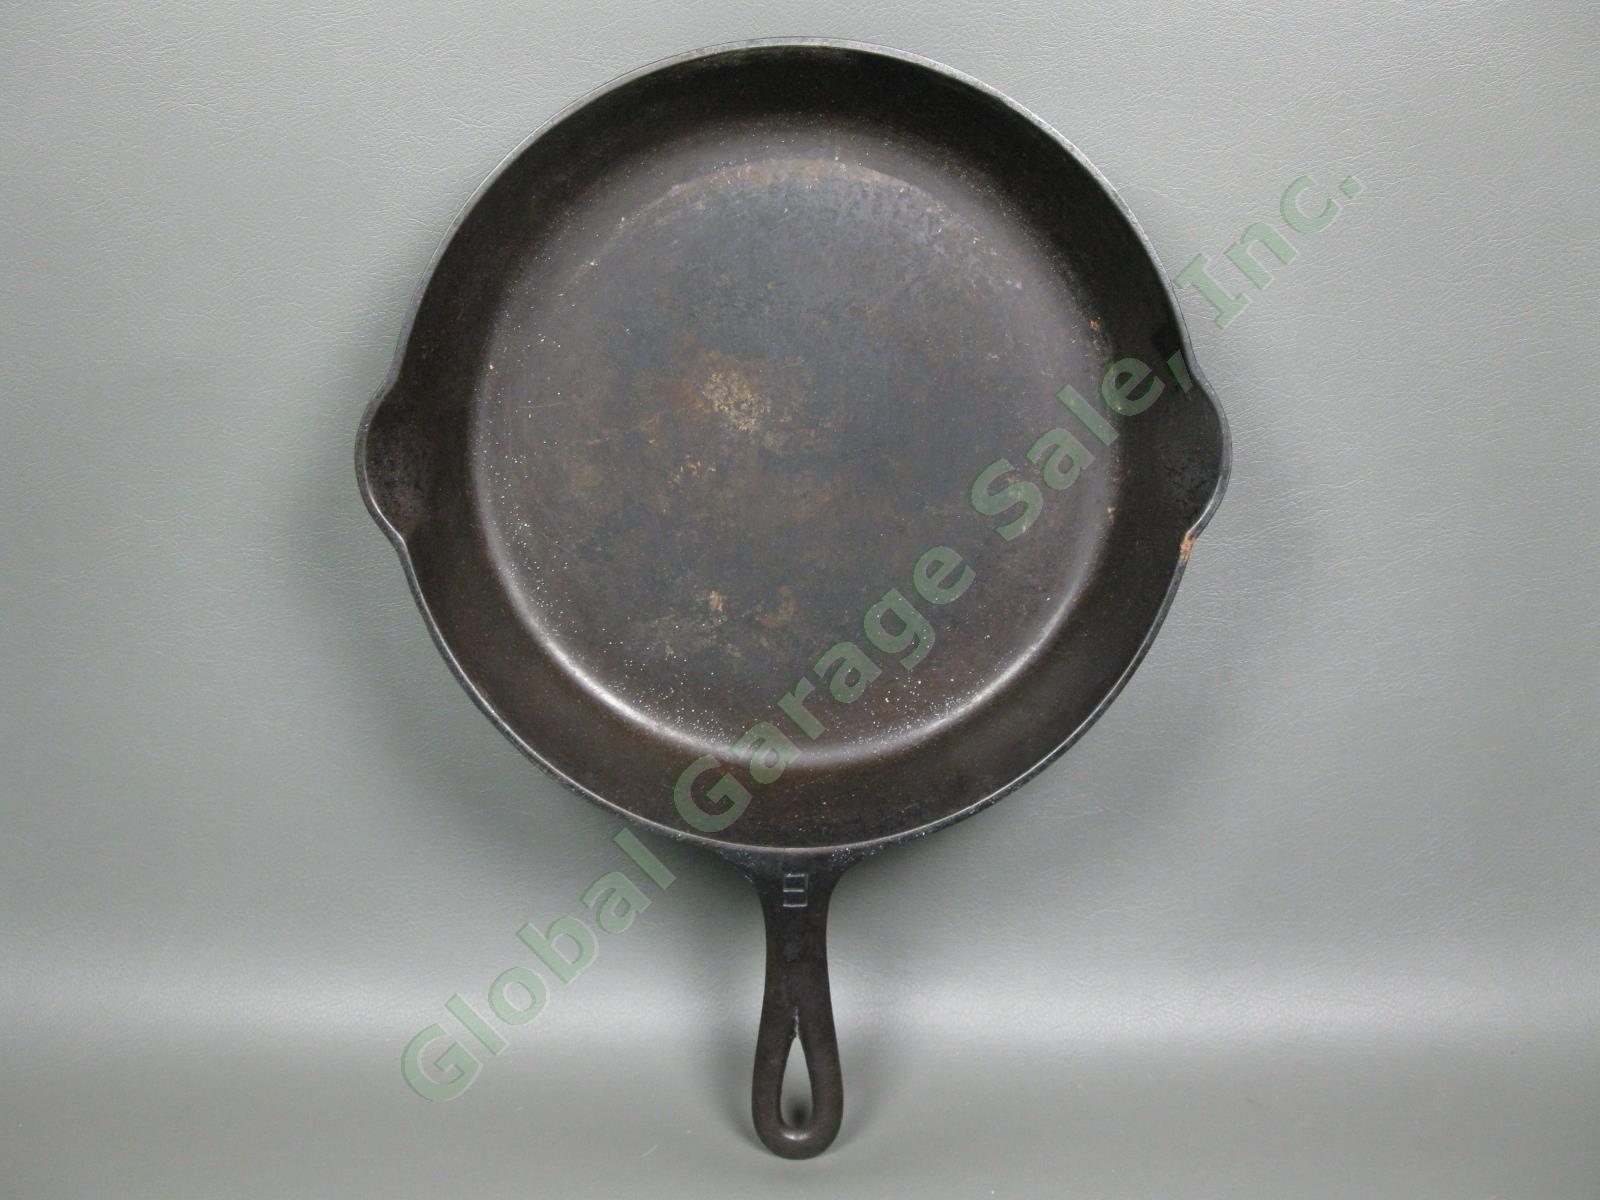 Vintage Griswold No-9 710-B Large Cast Iron Frying Pan Skillet Cookware Erie PA 1